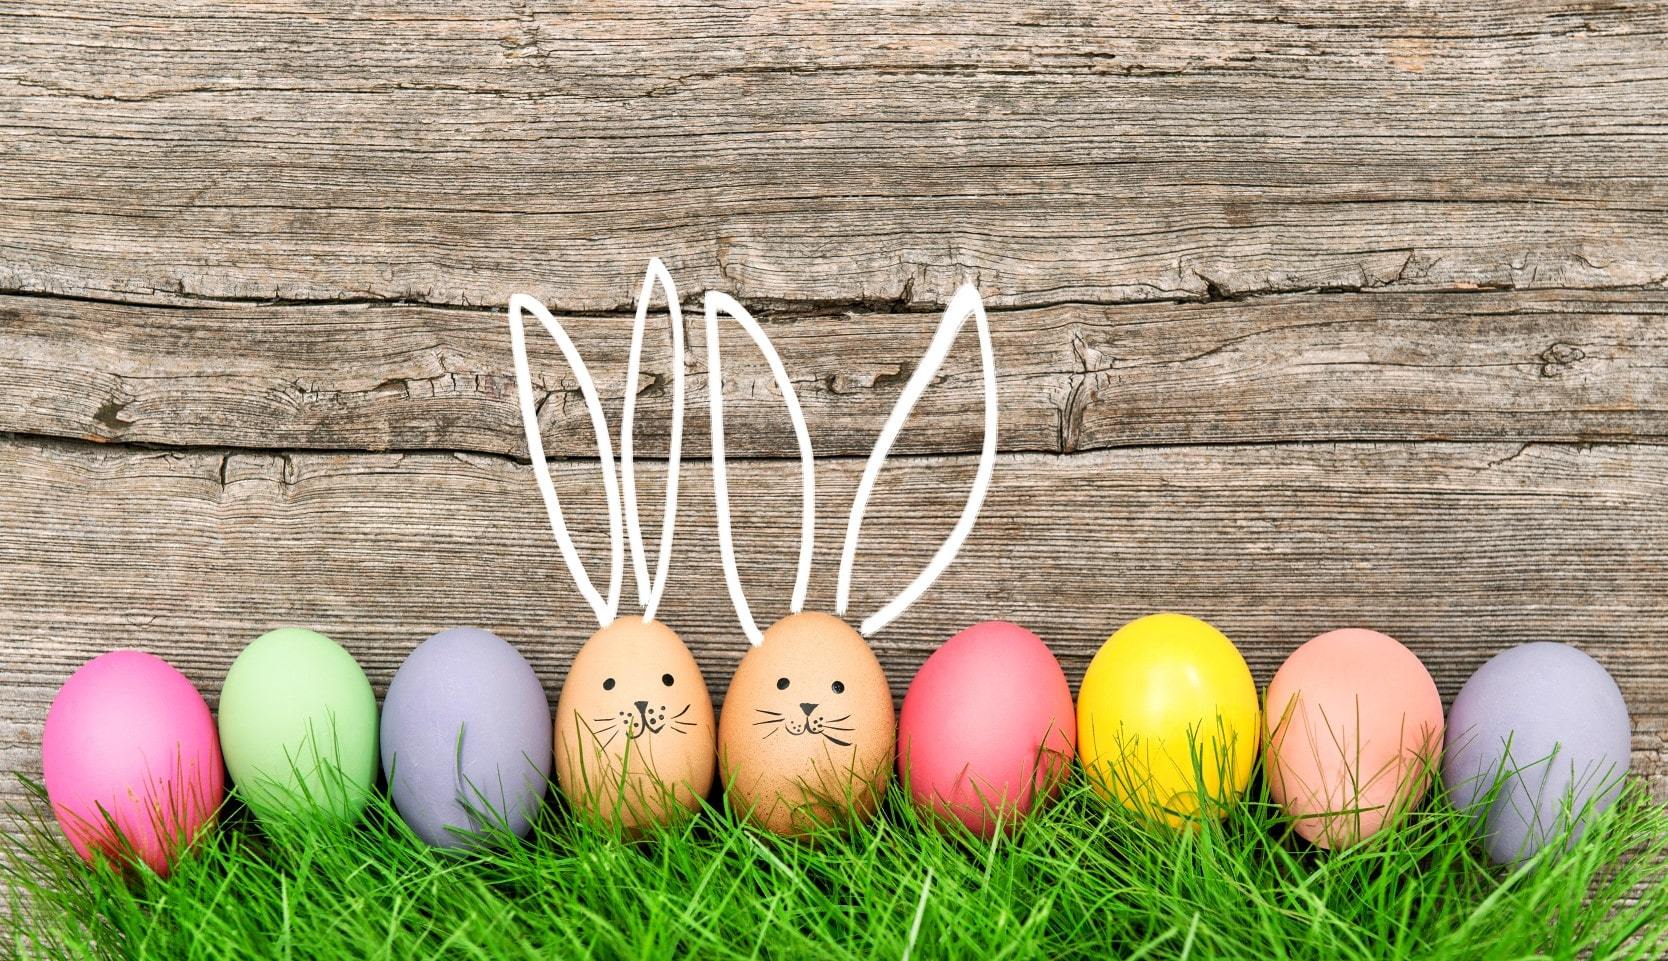 Colored Easter eggs and bunny ears against a wooden background